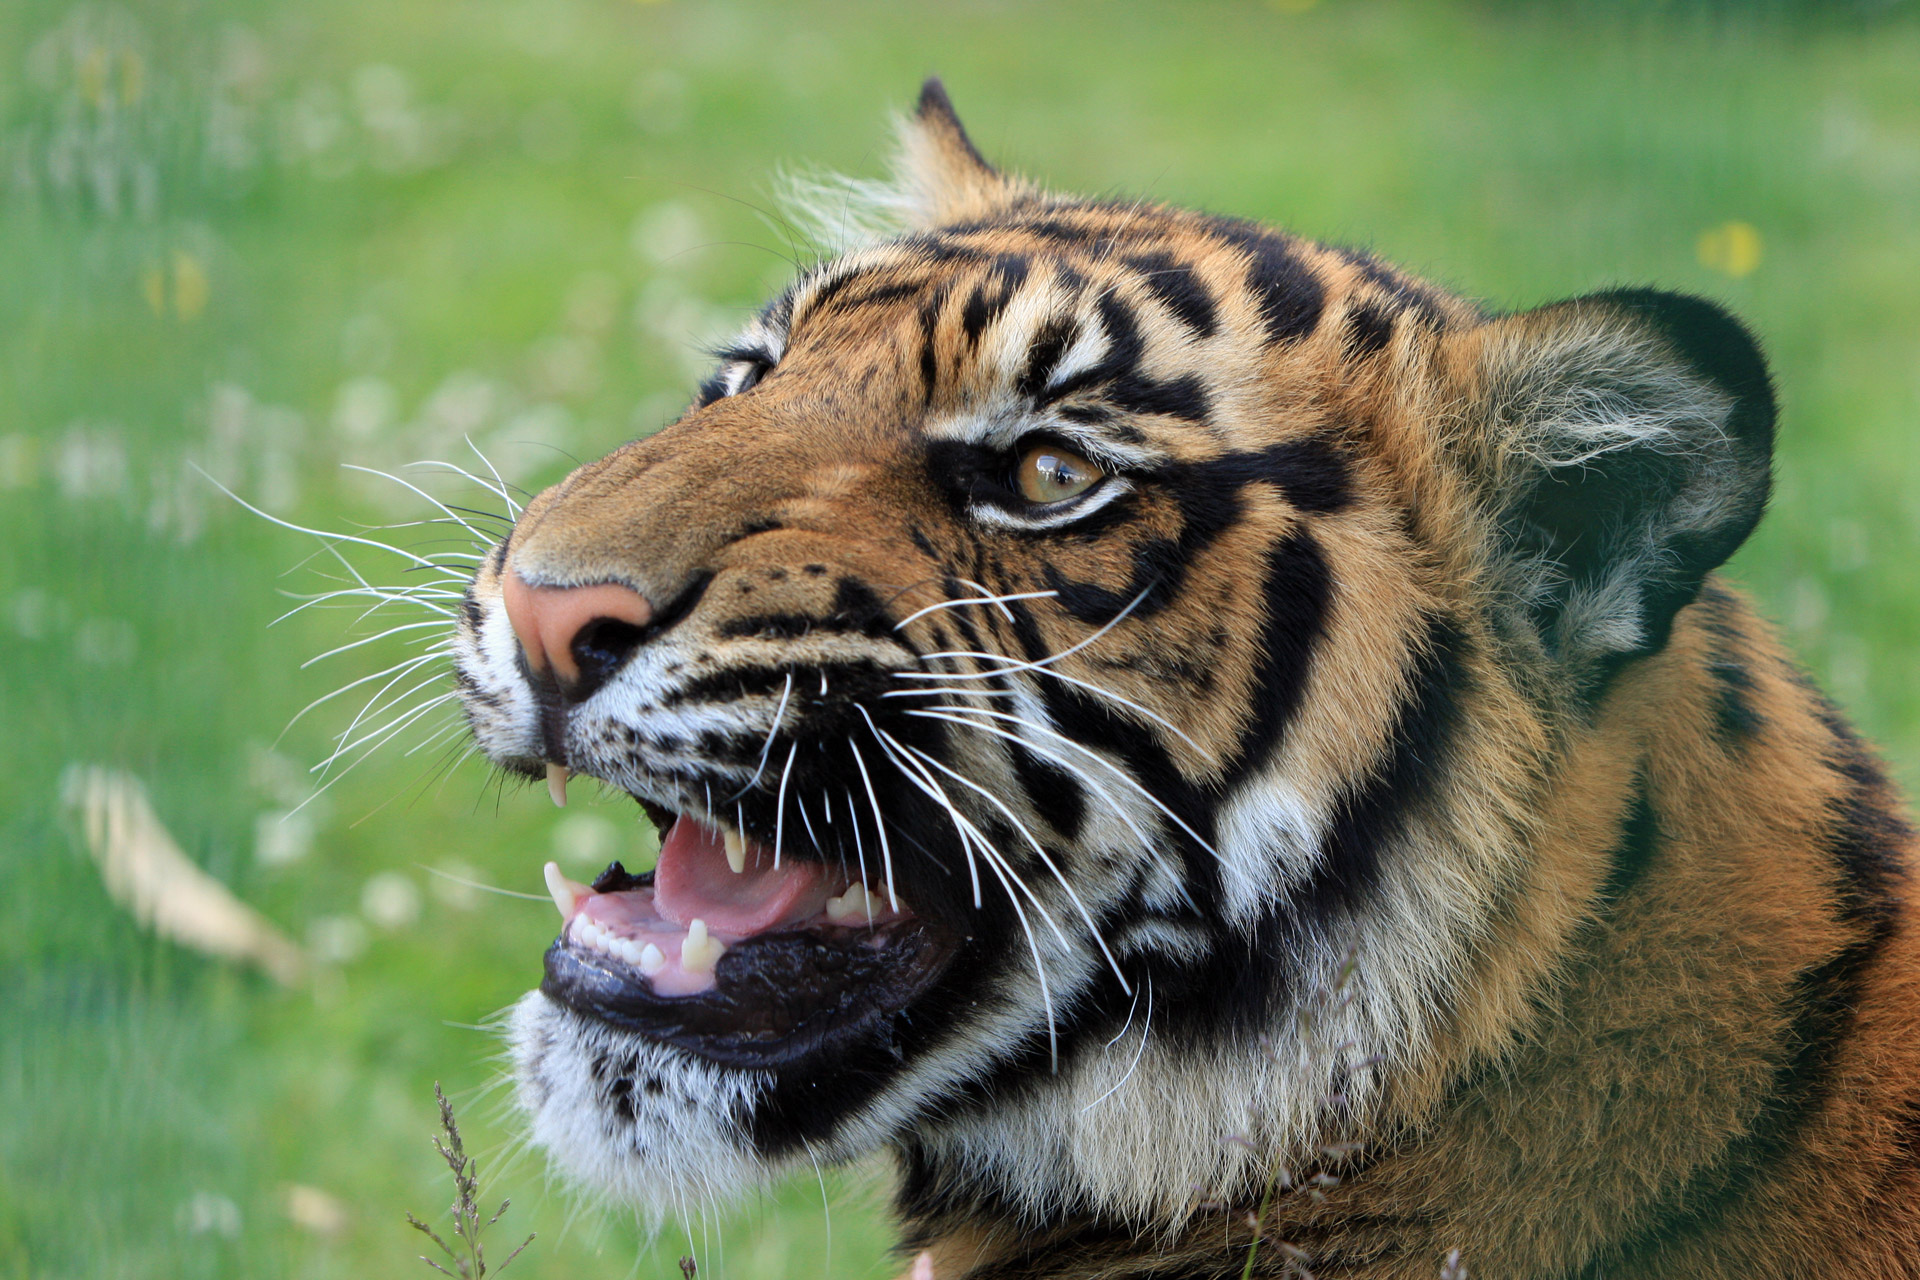 Close-up head portrait of a young tiger snarling